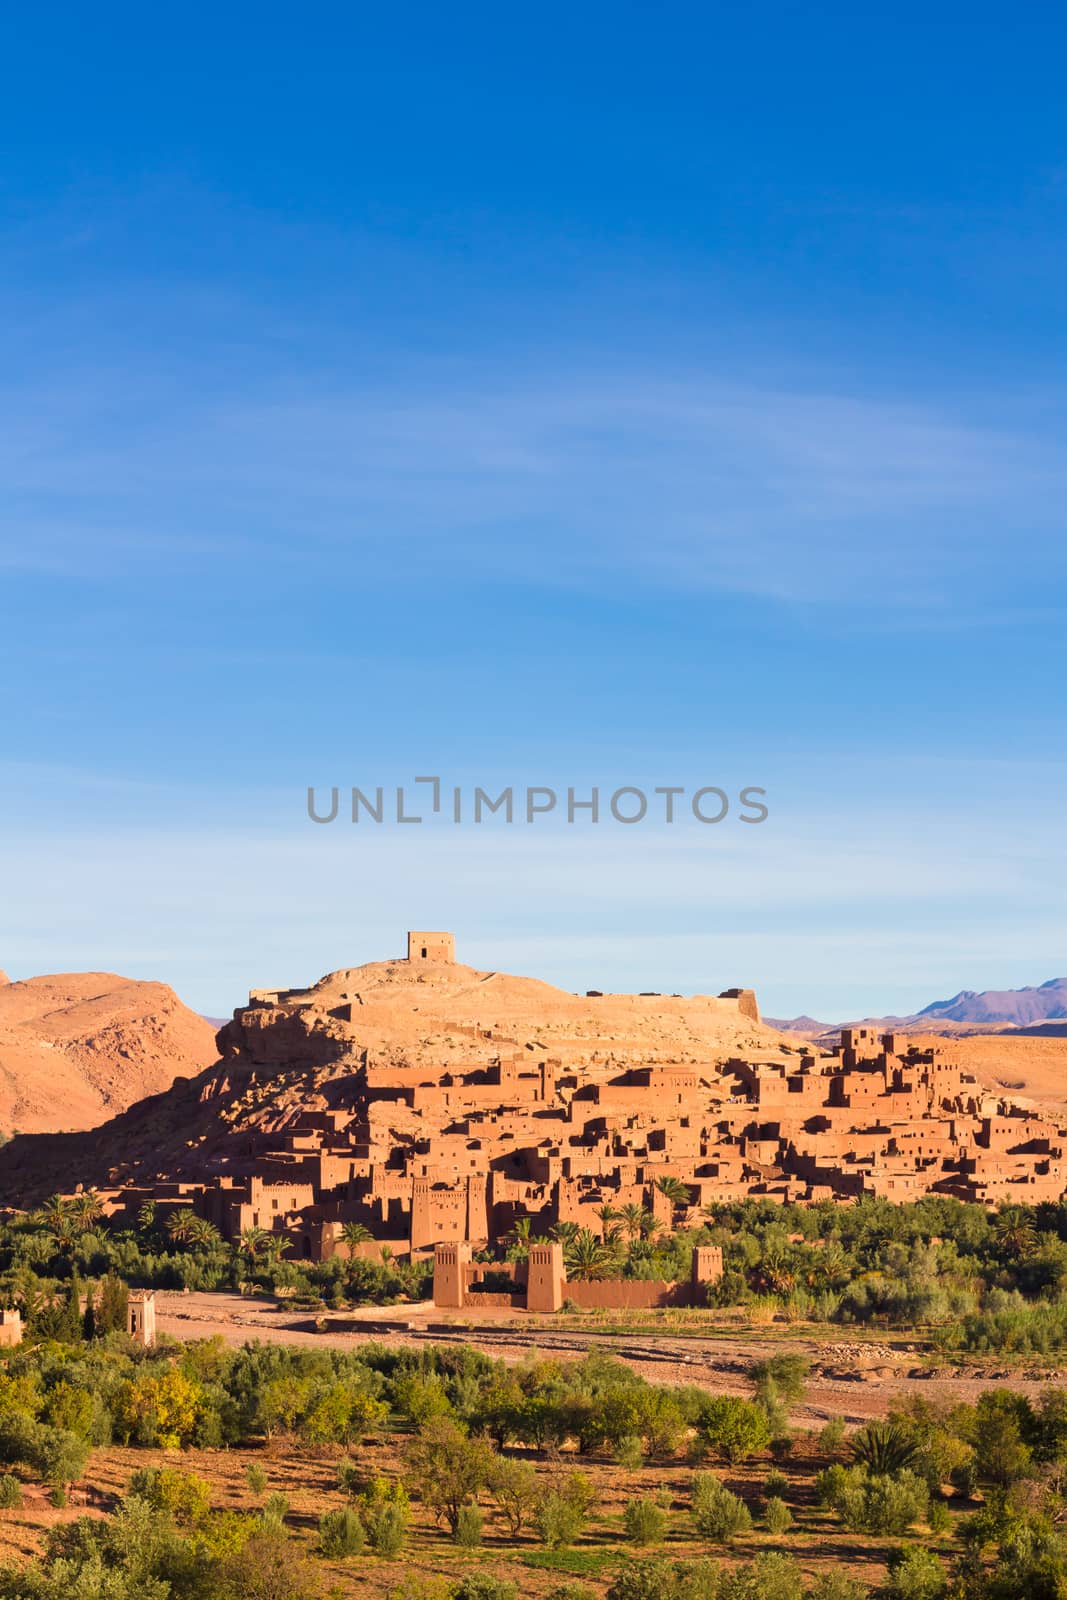 Ancient city of Ait Benhaddou in Morocco by kasto